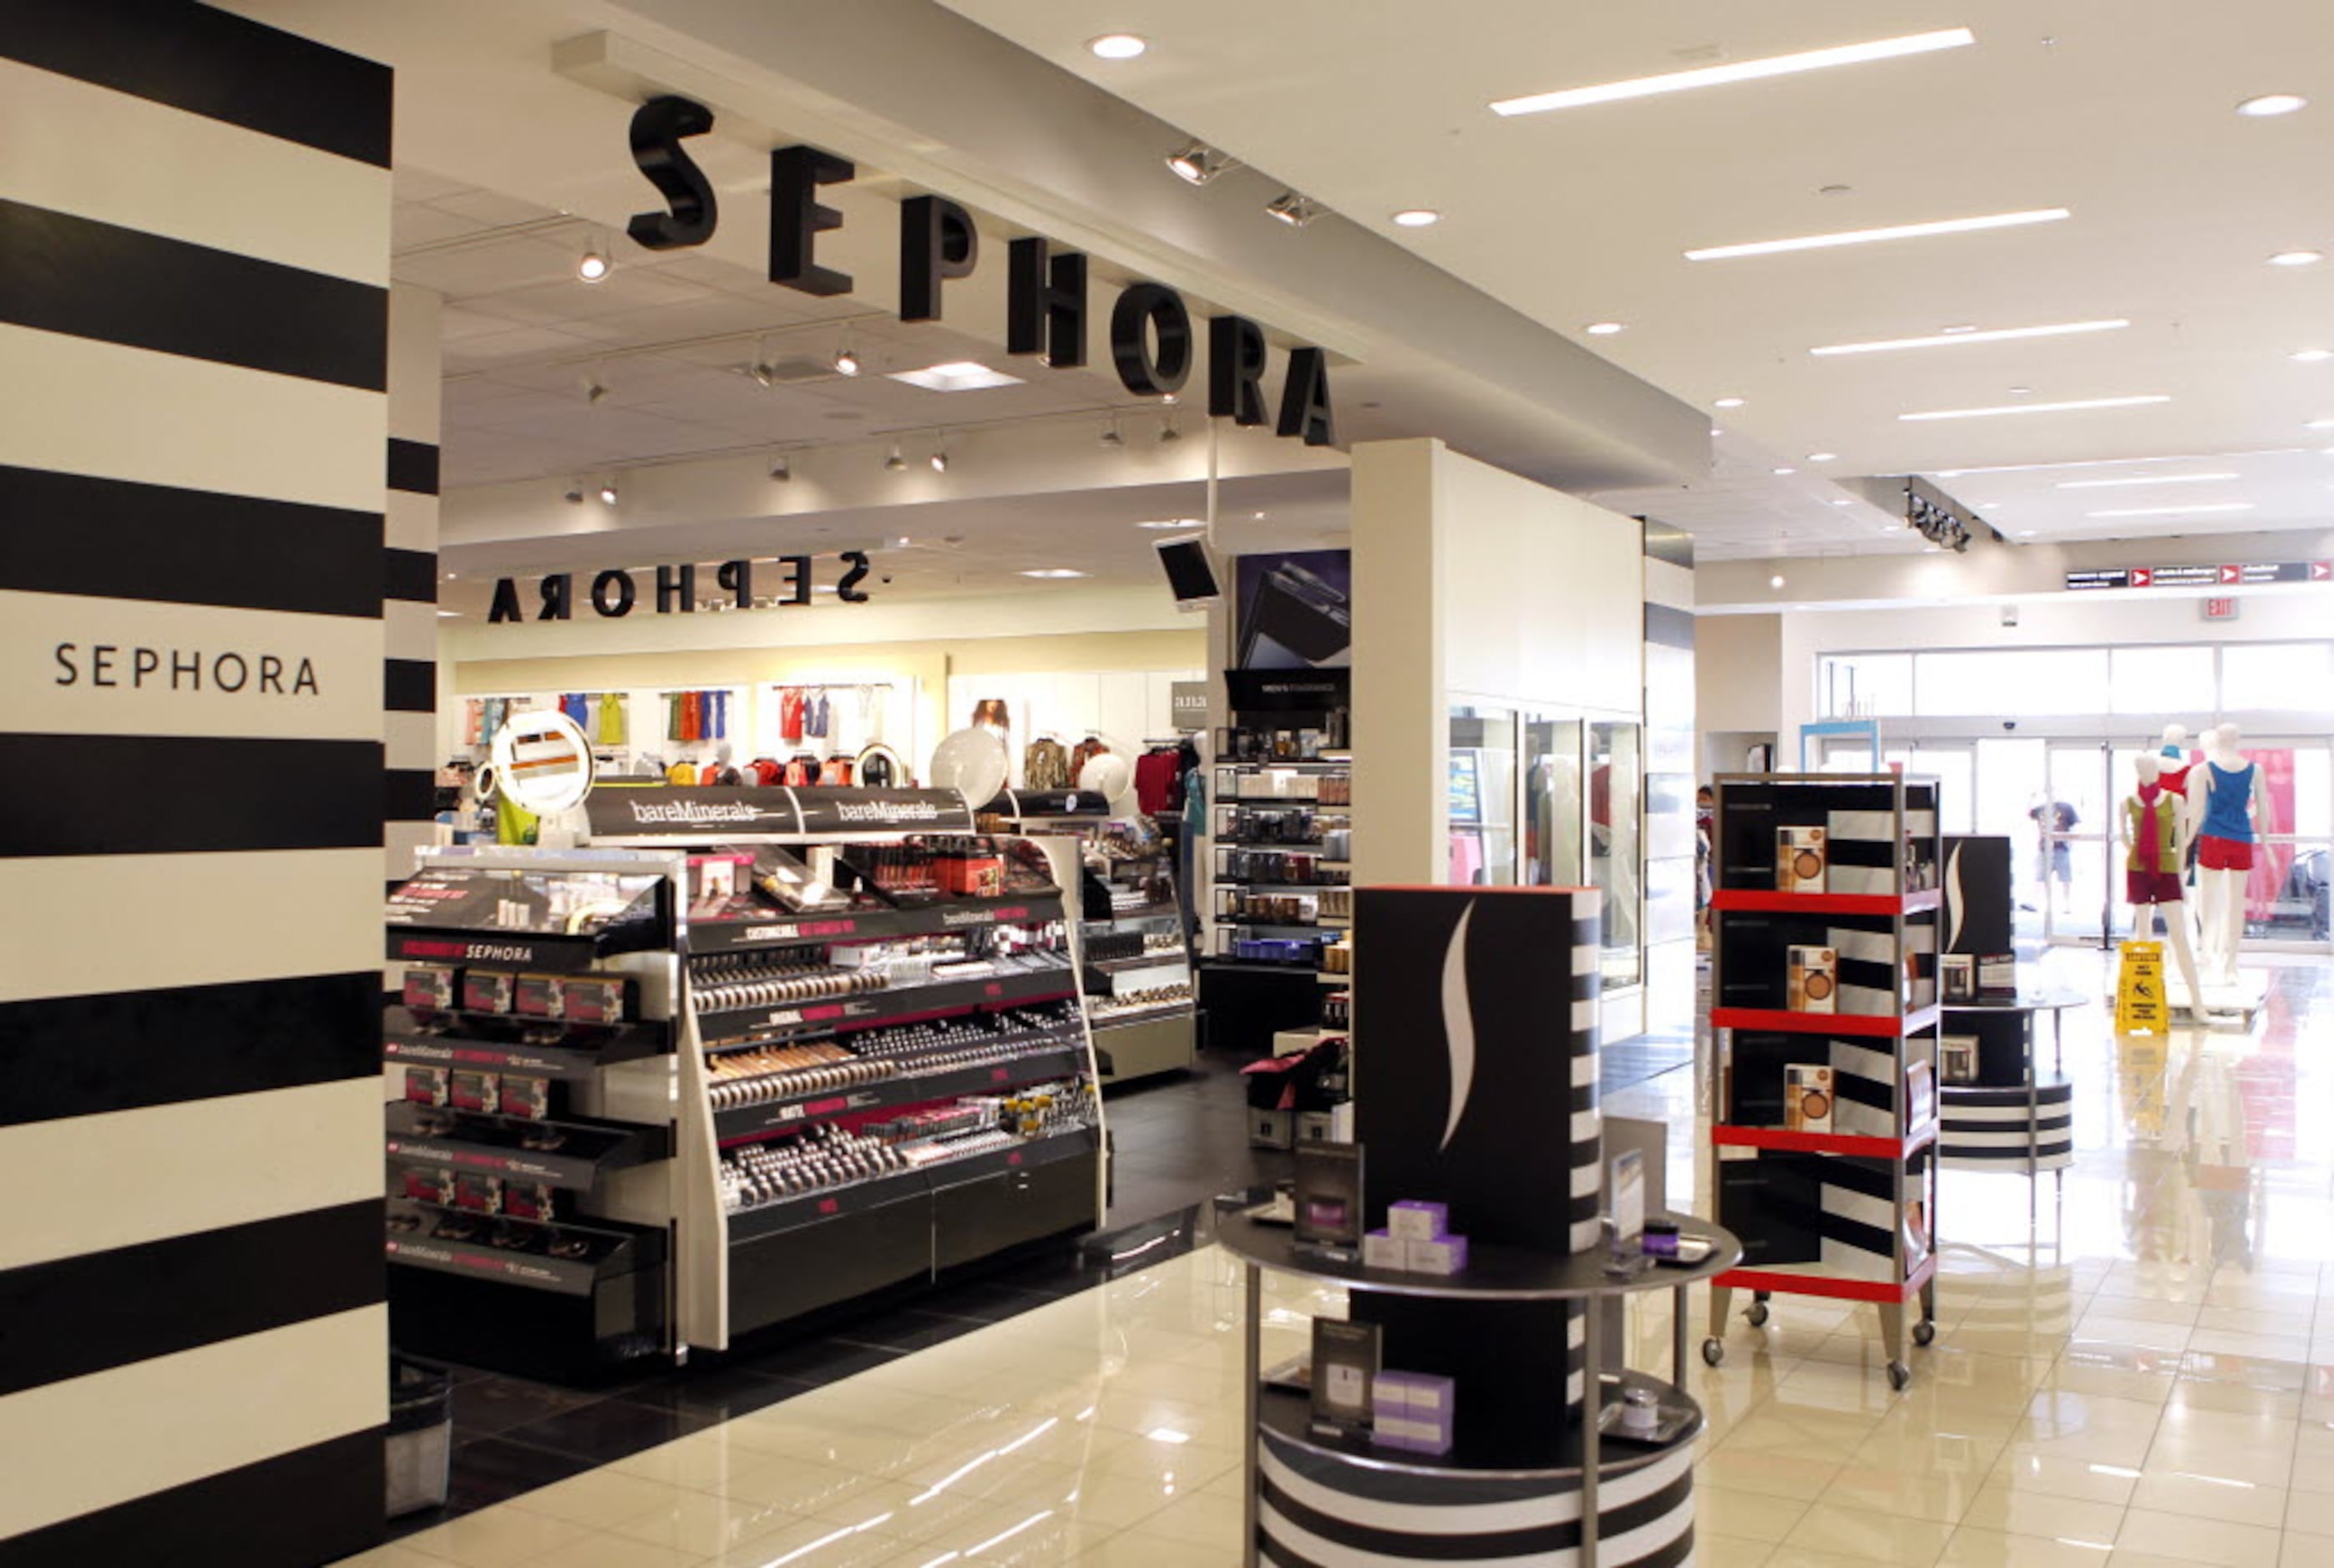 Kohl's will open Sephora beauty shops at 850 stores, replacing J.C. Penney